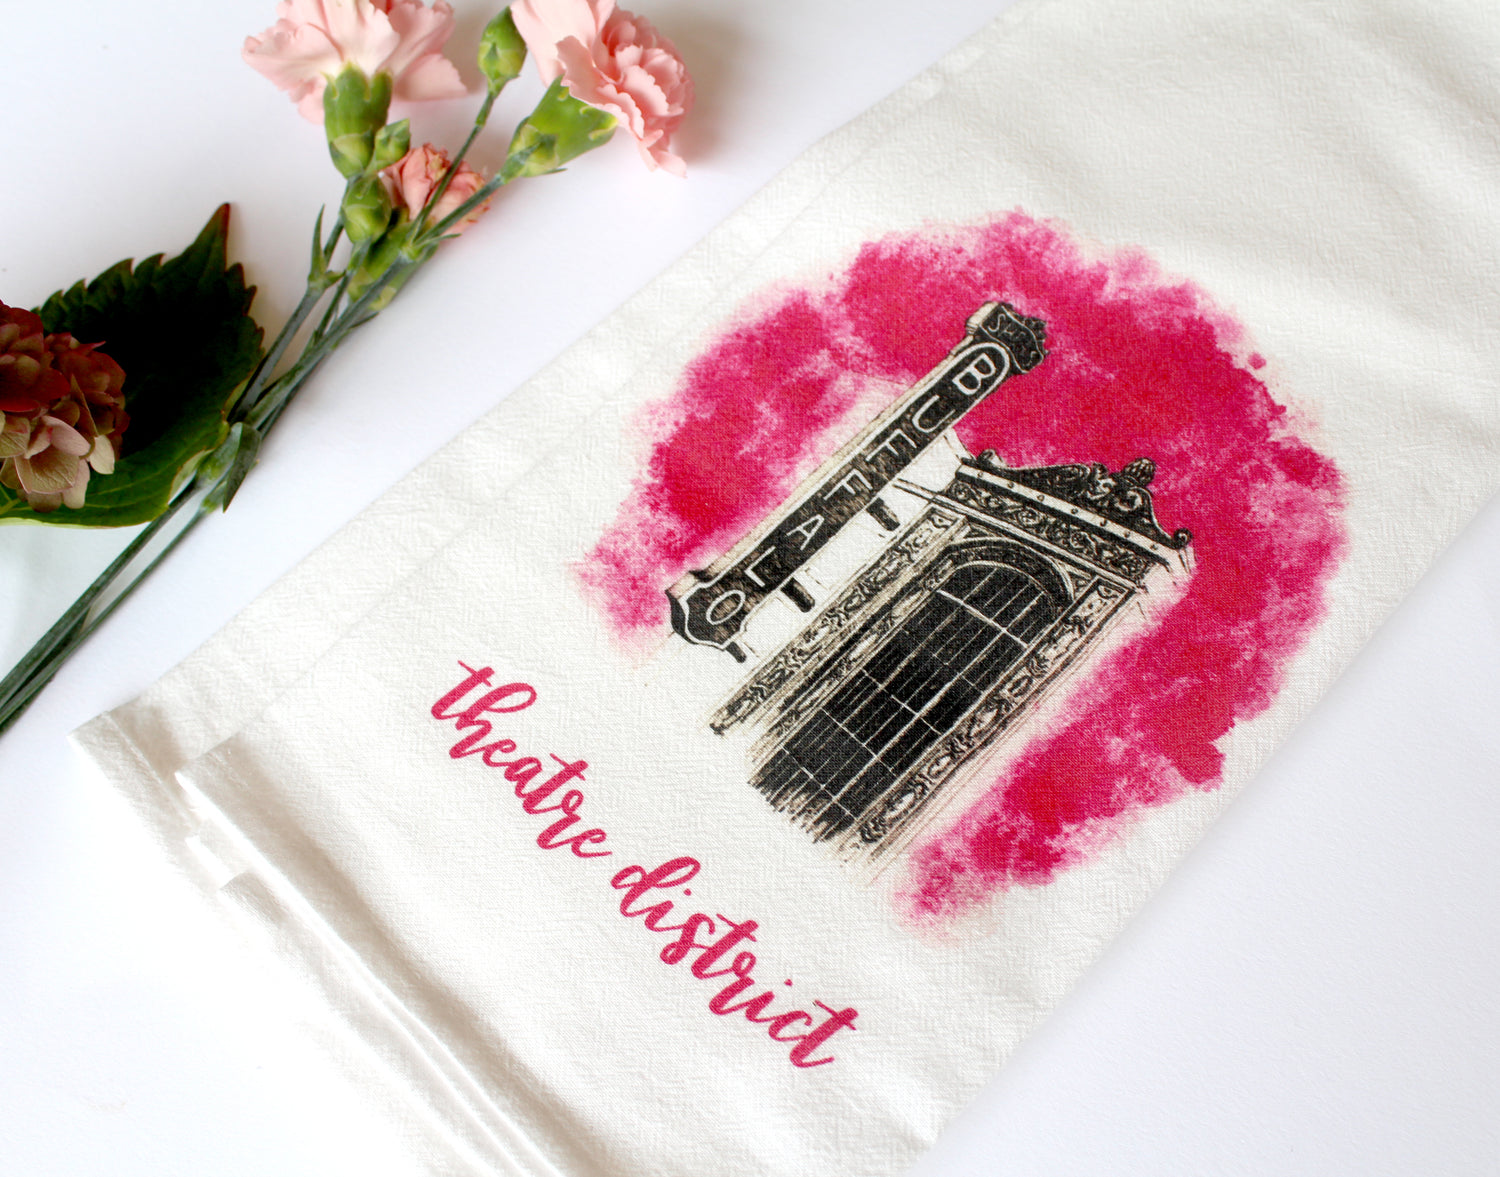 White Tea Towel with Shea's illustration that says "theatre district" by Rust Belt Love